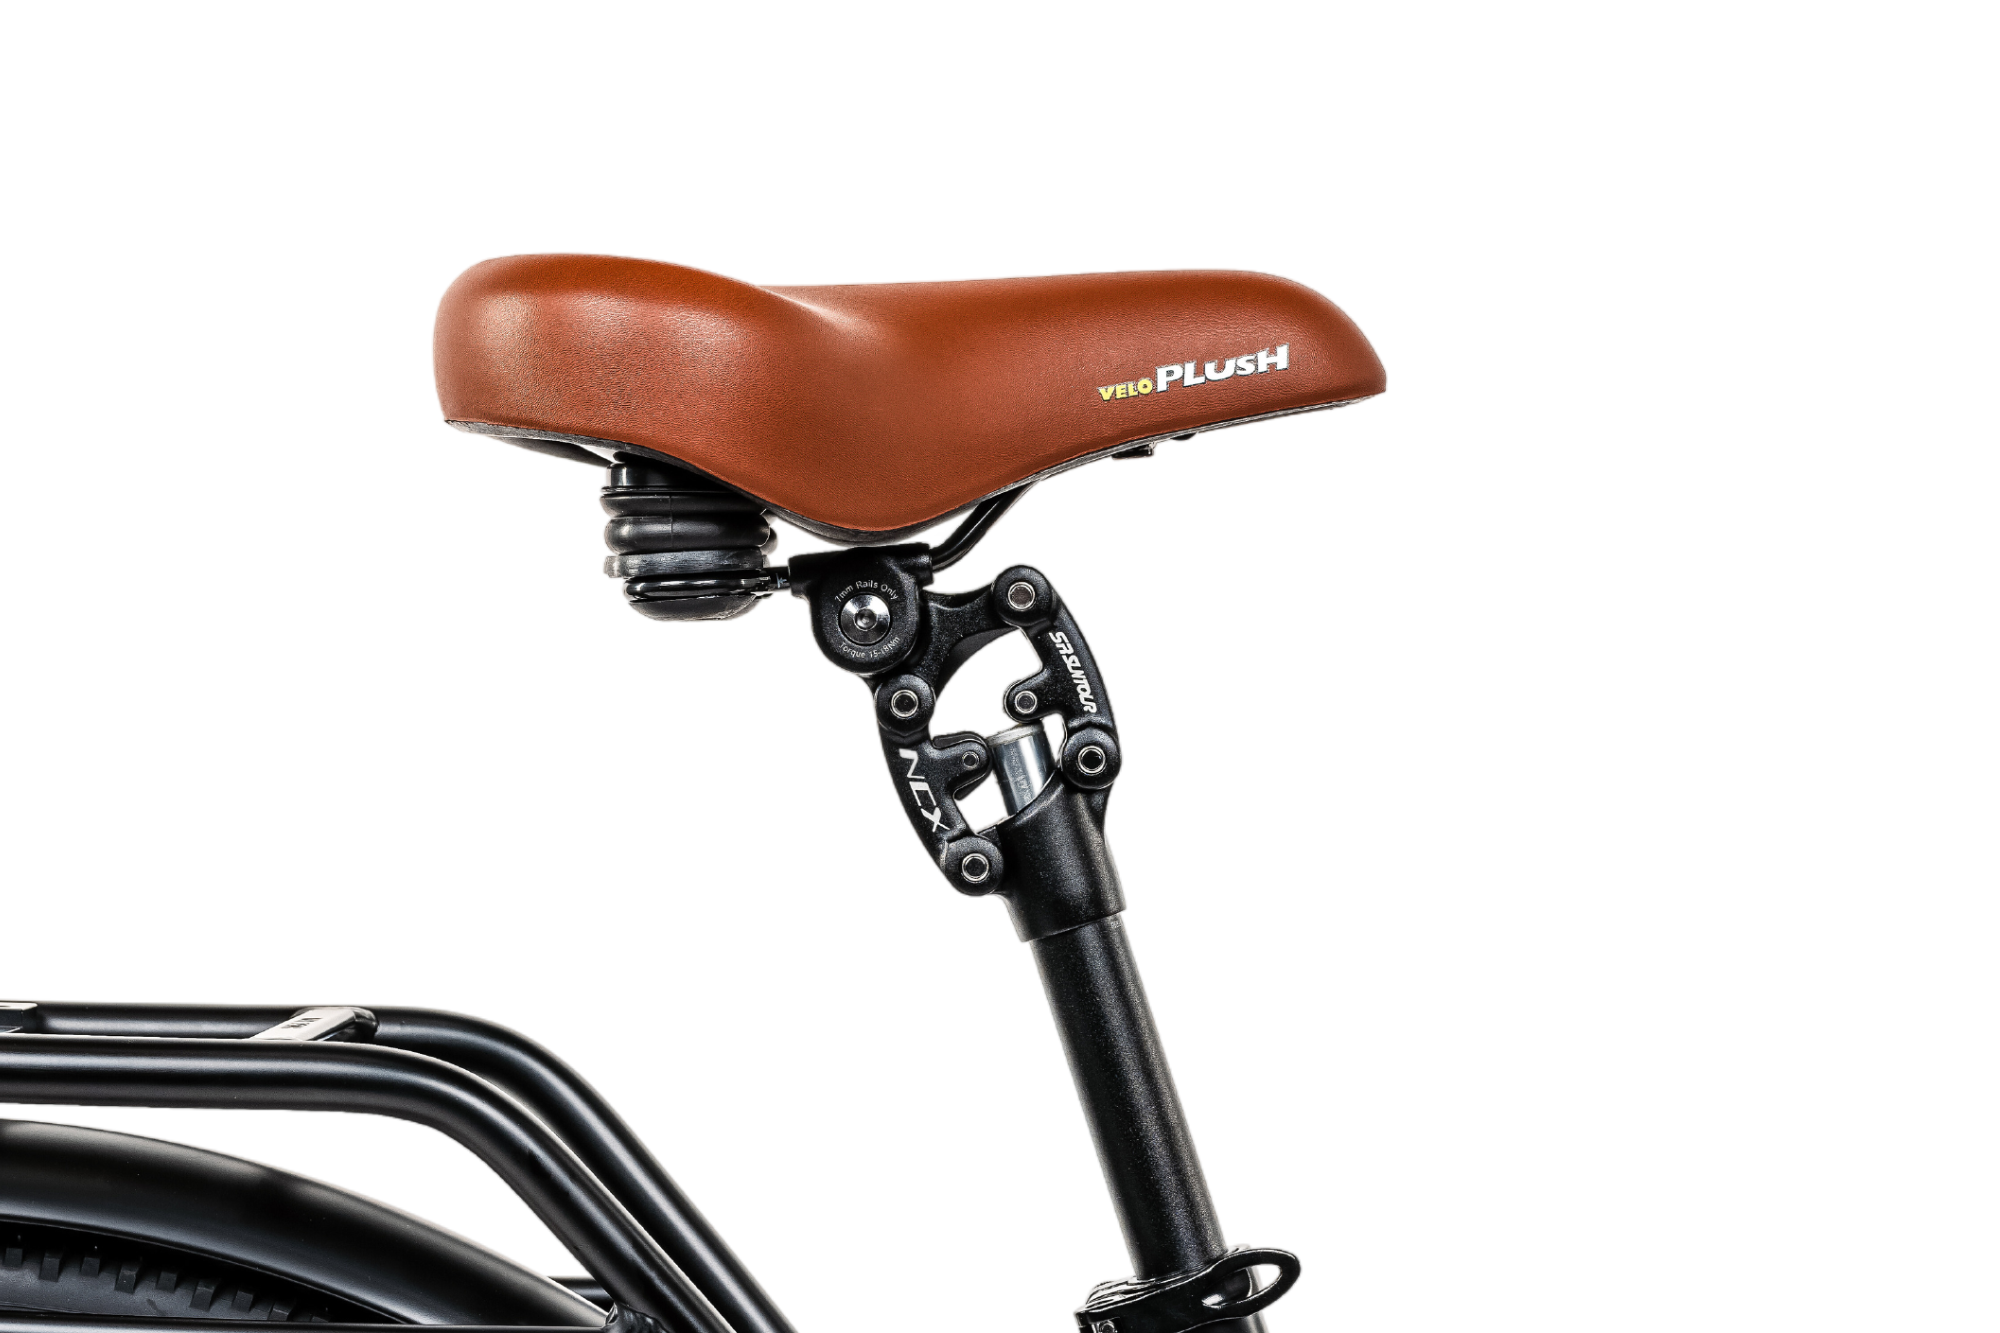 A wide saddle, it promises a more comfortable experience than the standard bicycle seat. Enjoy an extra layer of soft, supportive memory foam padding, a vacuum-formed, waterproof exterior, and elastomer spring rails to help smooth out bumps in the road